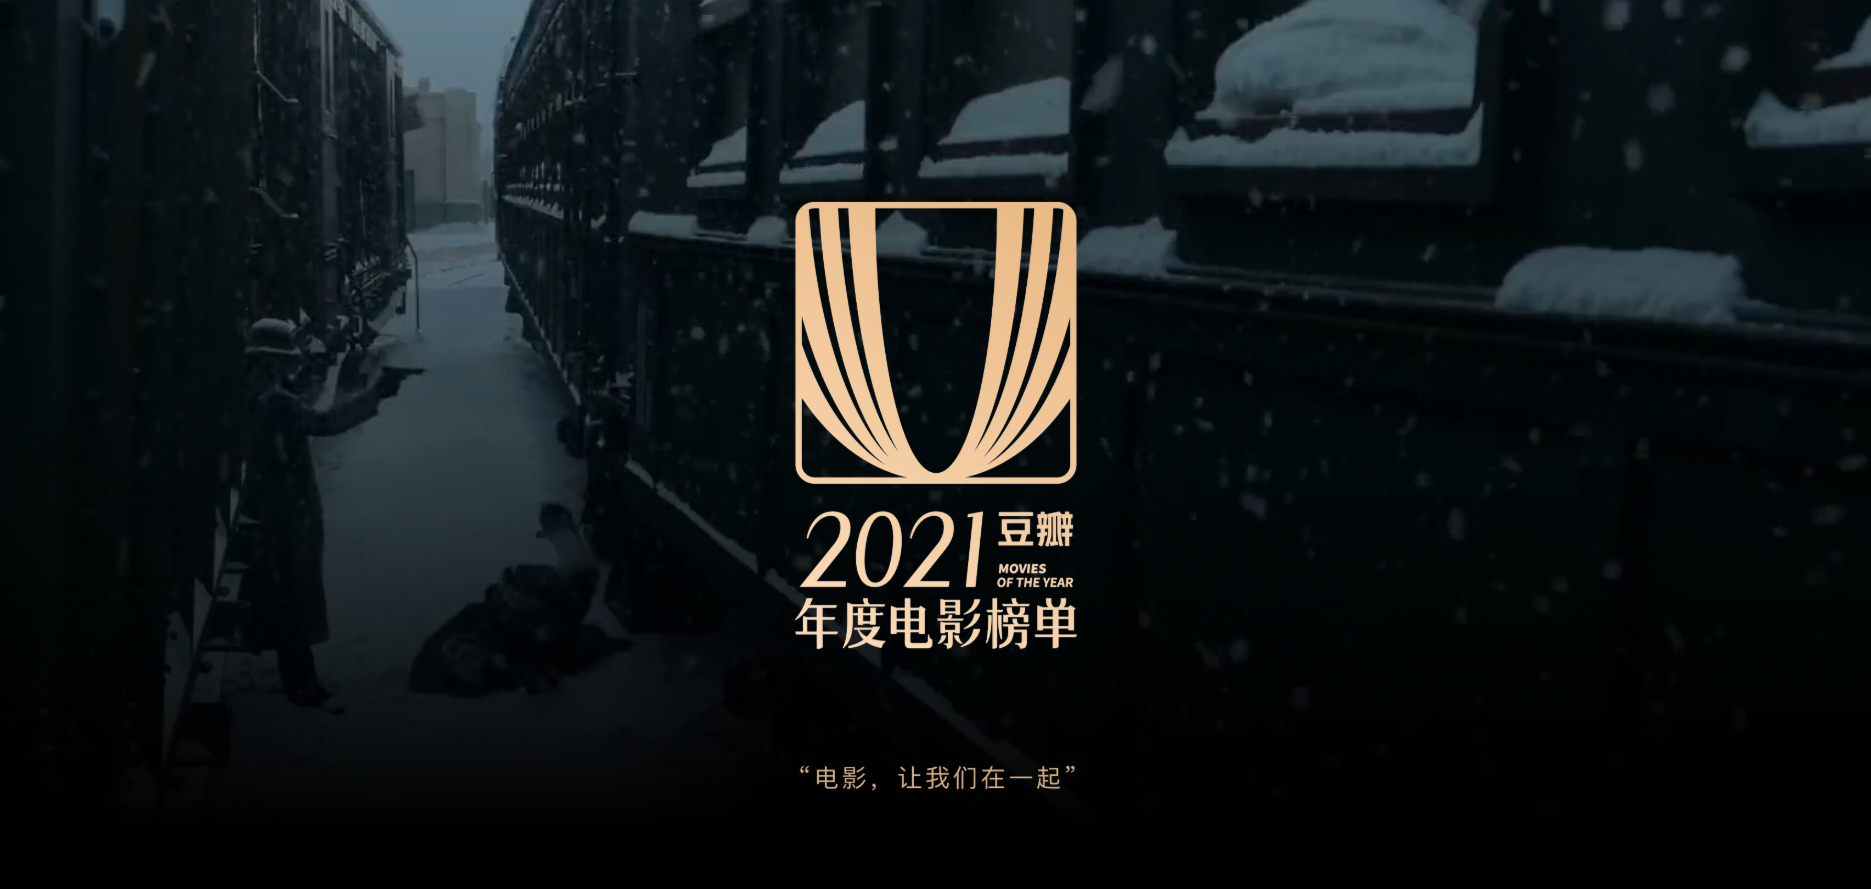 The Top 10 Chinese films selected by the Chinese in 2021